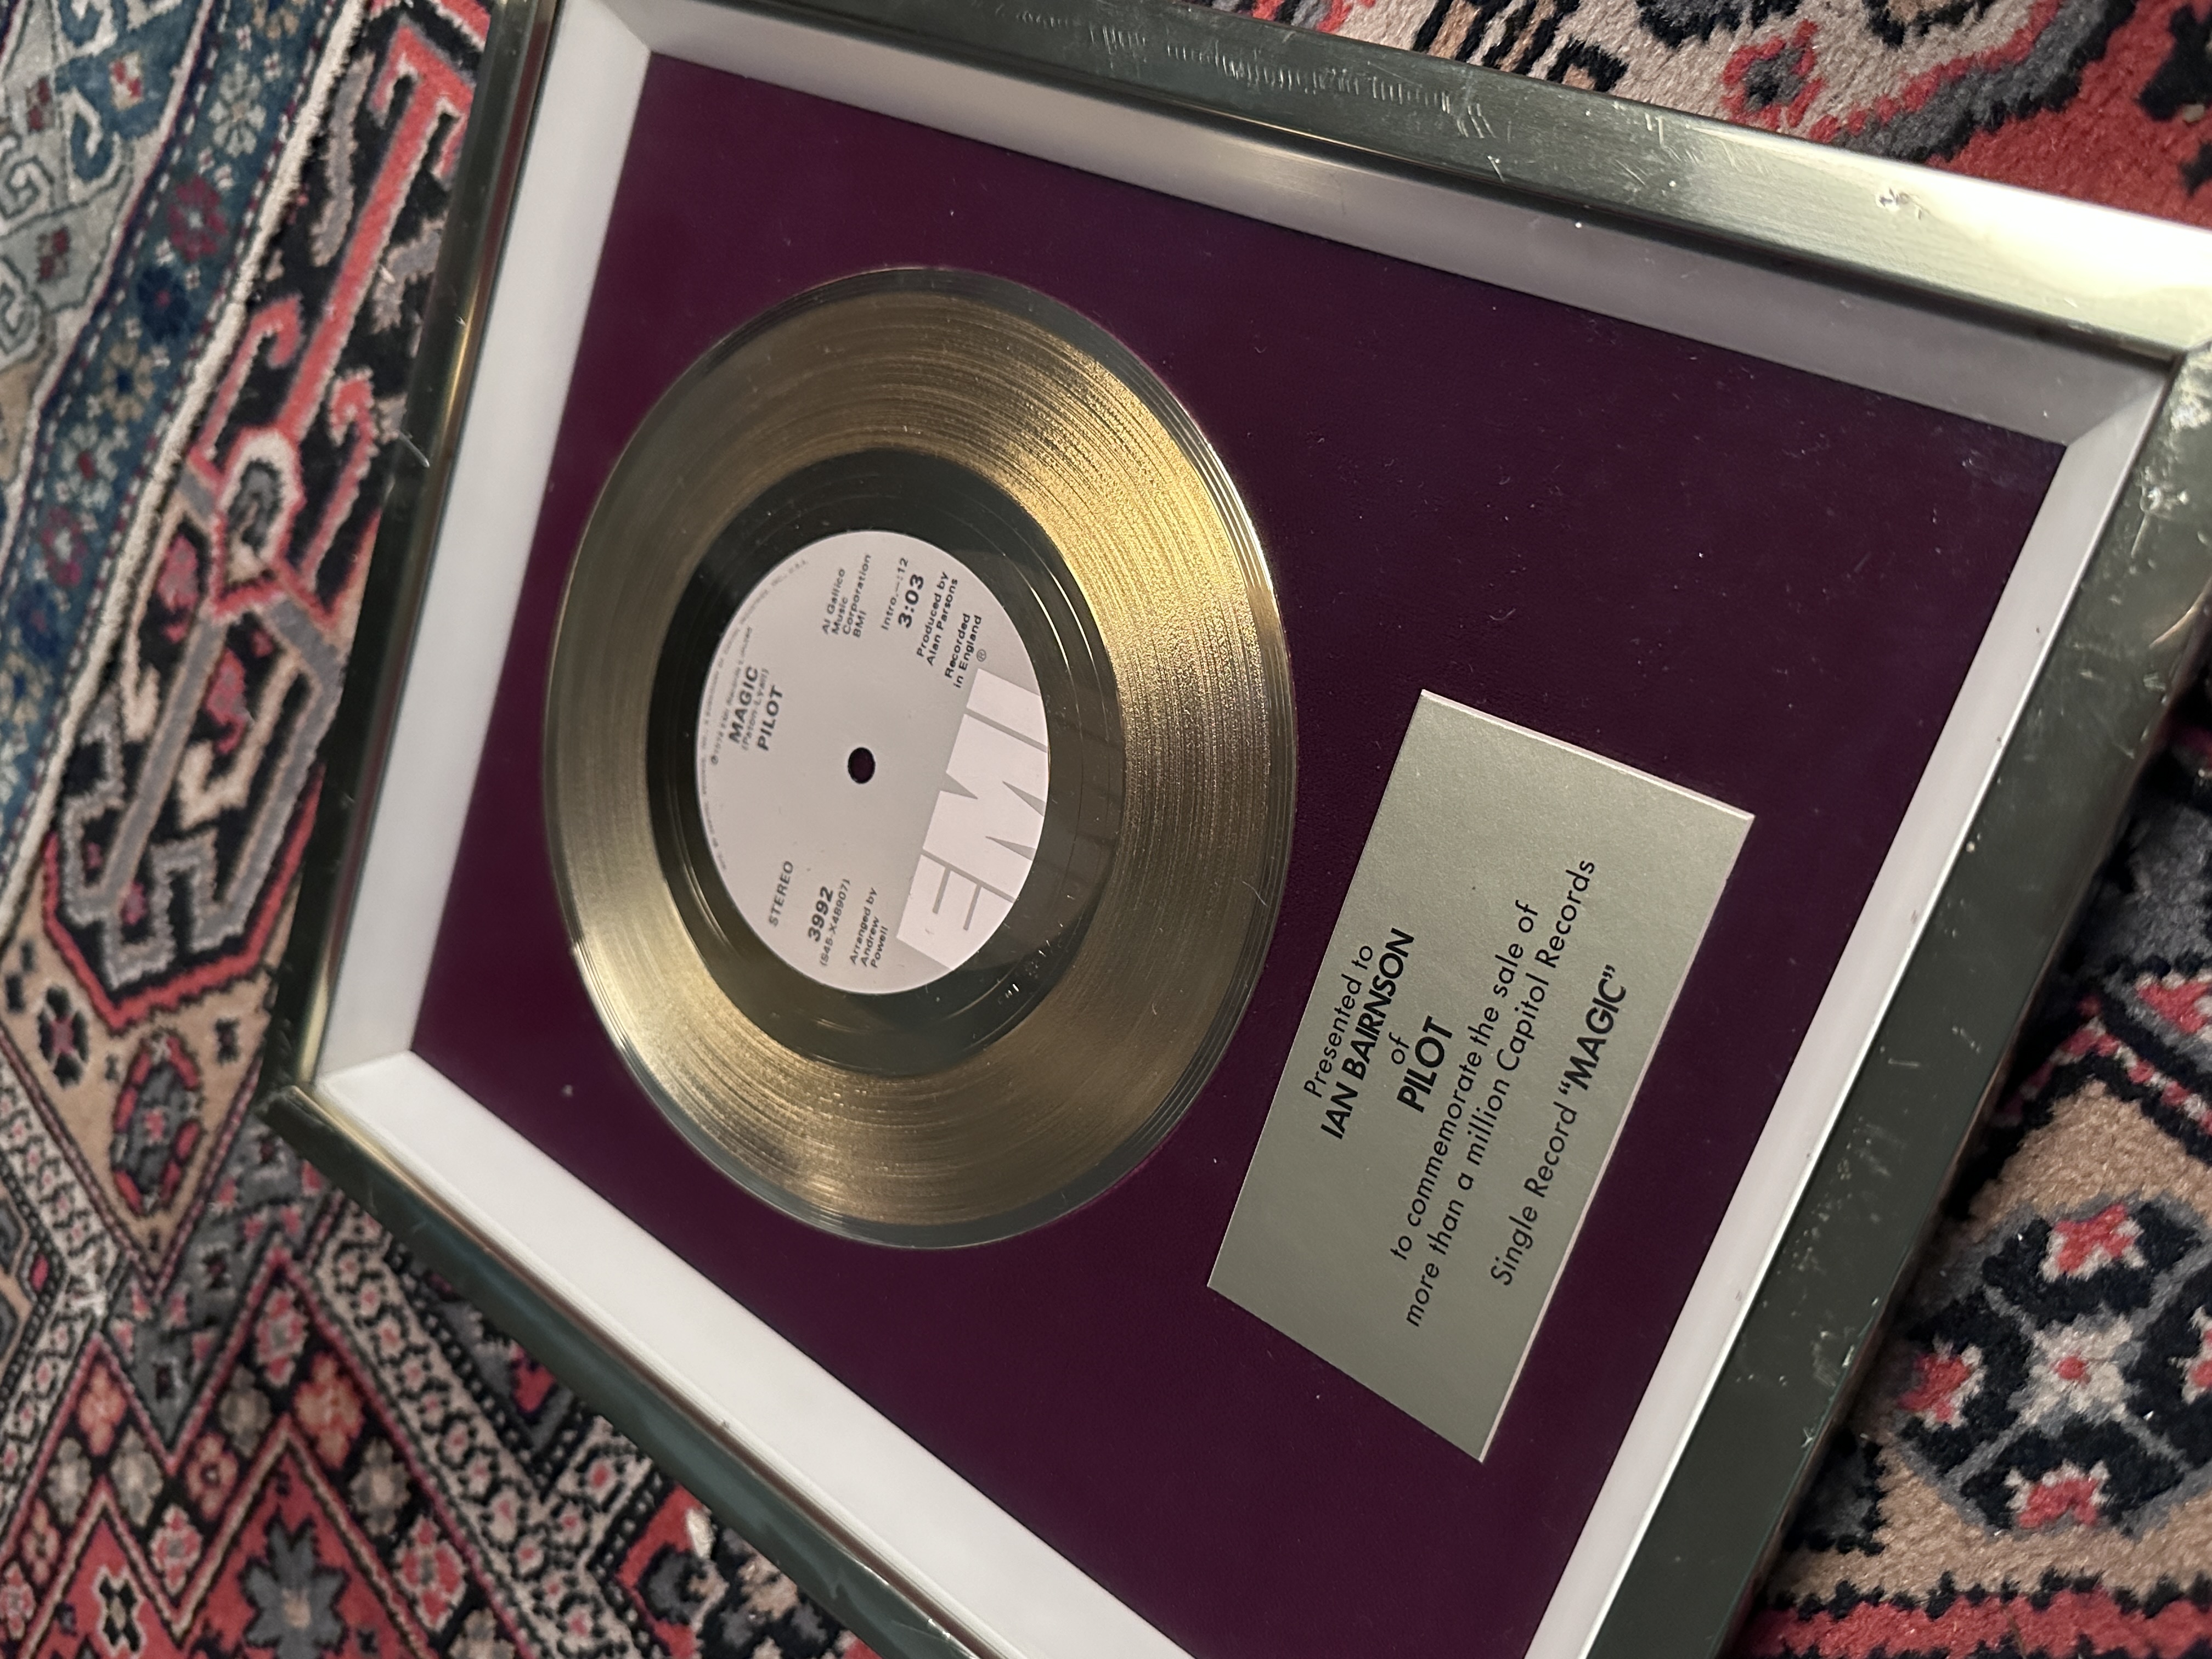 Ian Bairnson won a gold disc for playing guitar on 1970 pop band Pilot's hit Magic. The song later featured in the Adam Sandler film Happy Gilmore (Gardiner Houlgate/PA)